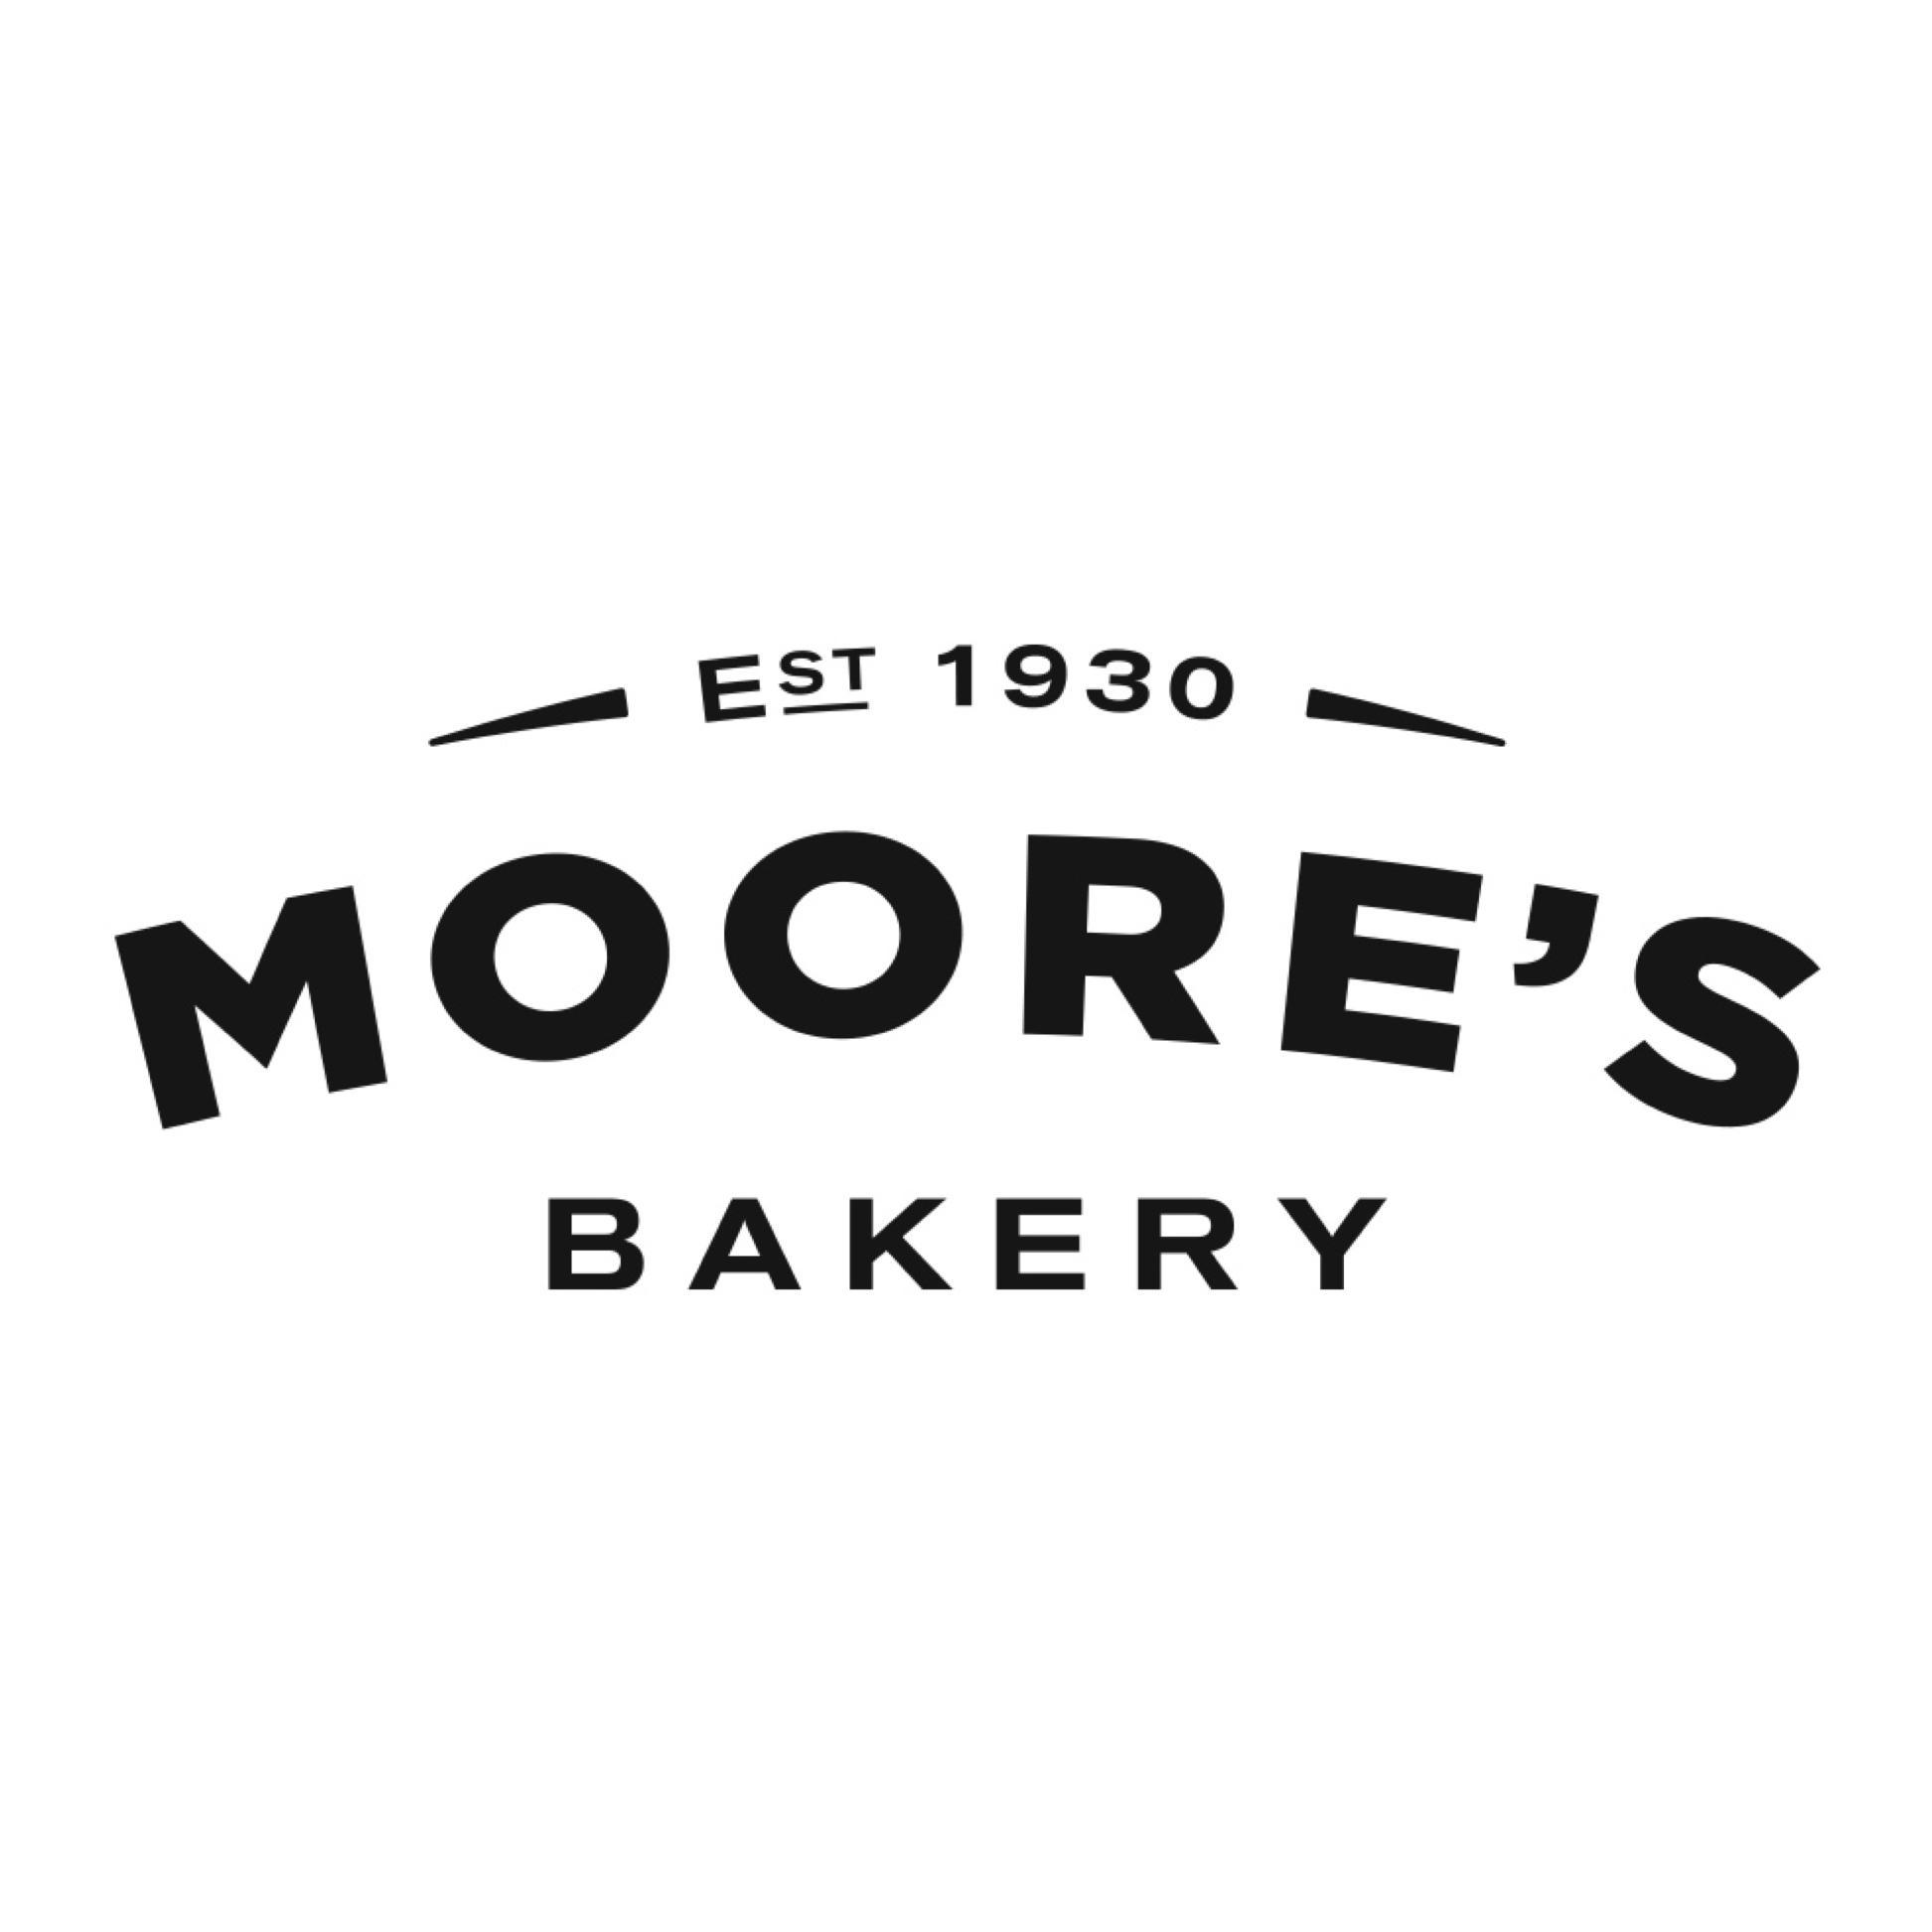 Since the 1920s, Moore’s Bakery of Kerrisdale has been providing families with traditional pastries, cookies, baked goods and a variety of breads.